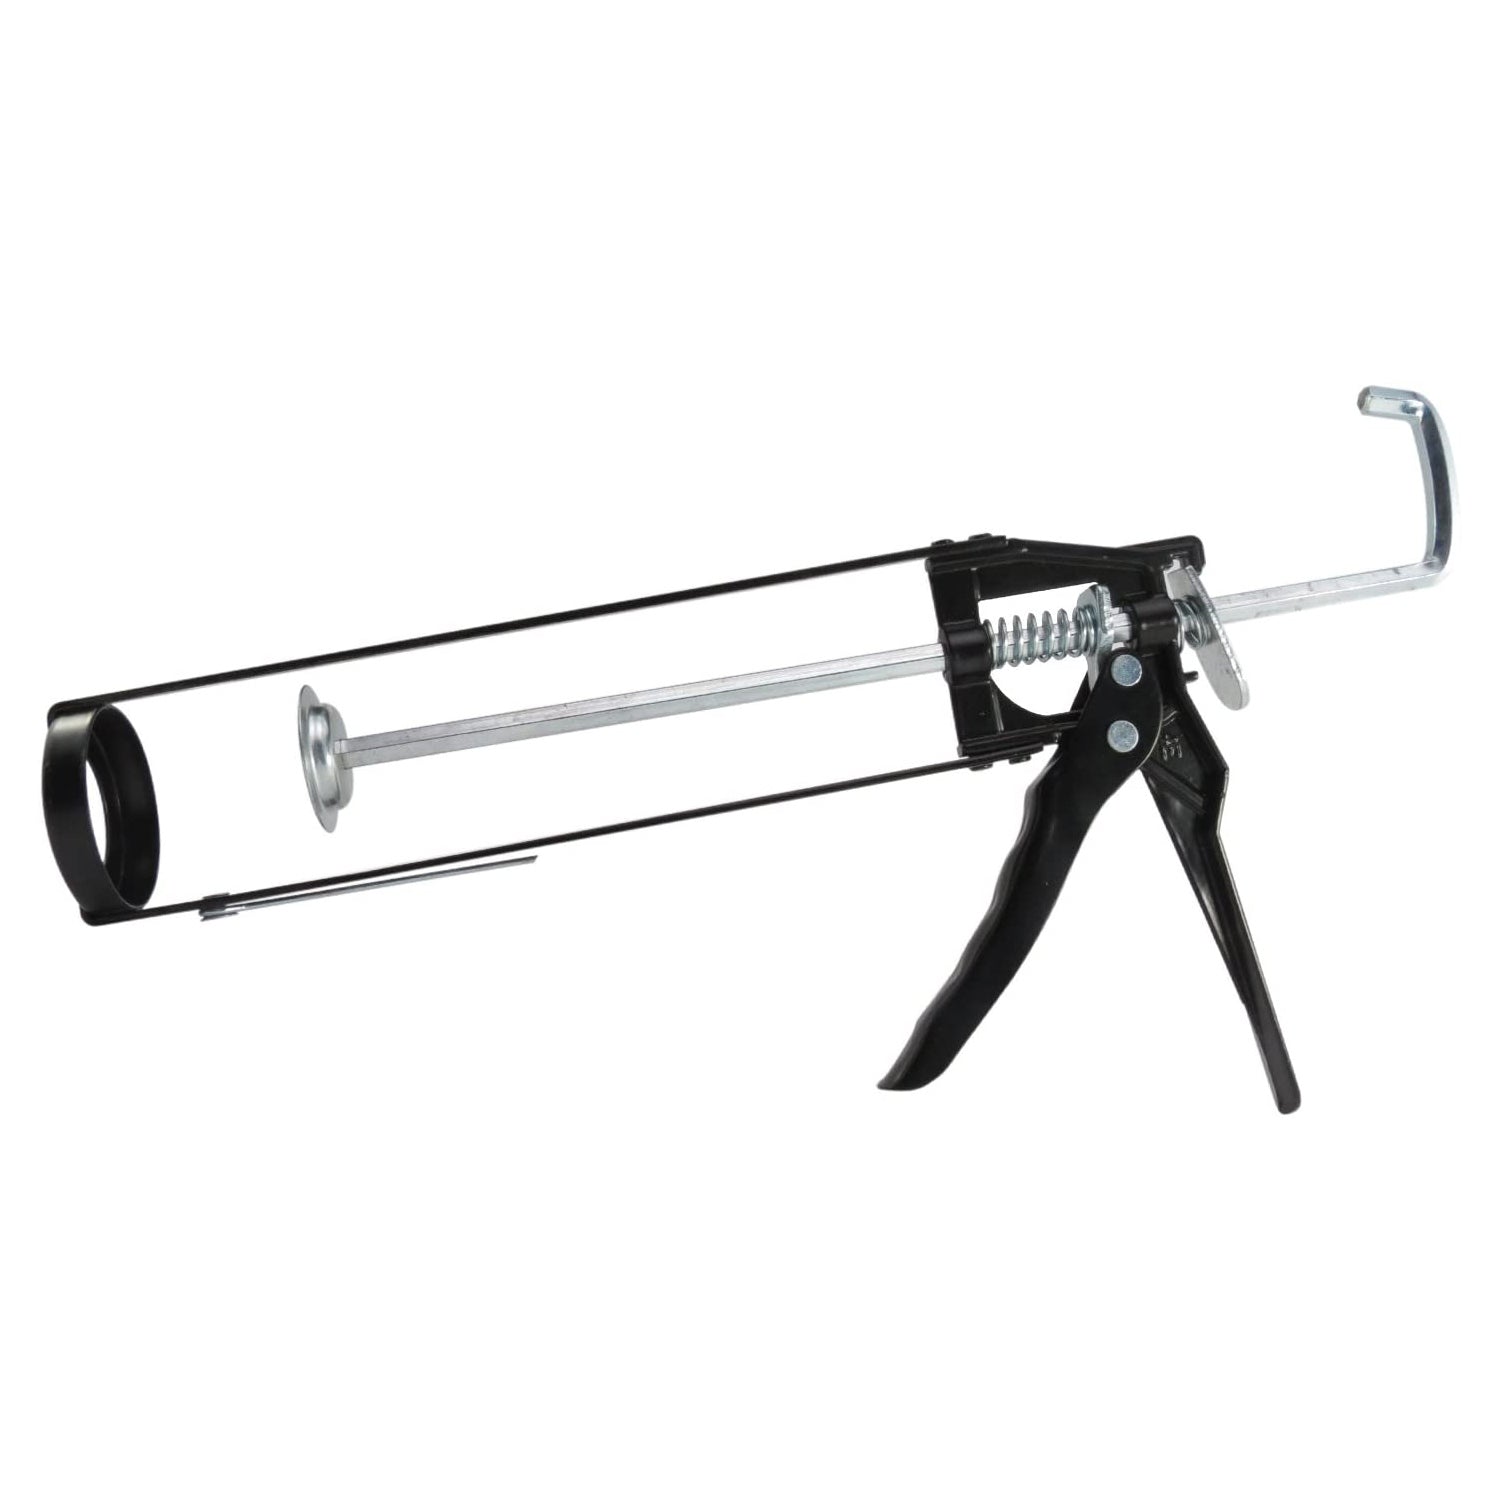 Dynamic Skeleton Style Caulking Gun, available at Harris Paints and BH Paints in the Caribbean.